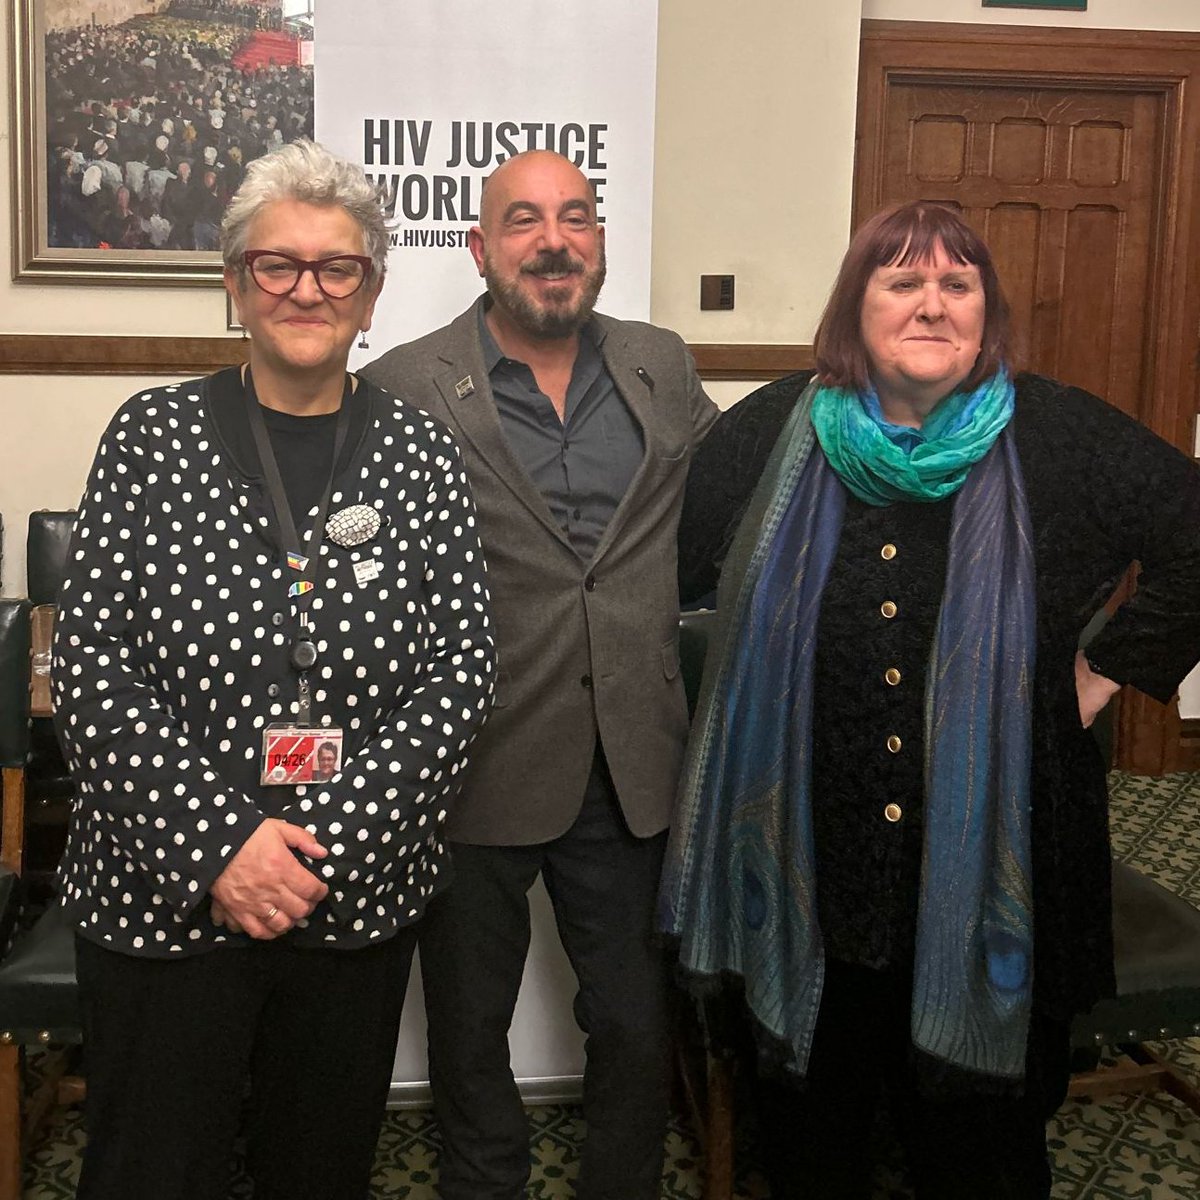 Thank you @LizBarkerLords, @alisapower and @APPG_HIV_AIDS for supporting @HIVJusticeNet and commemorating the first global HIV Is Not A Crime Day in #UKParliament #HINACDay #HIVisNotaCrime #HIVjustice hivjustice.net/news/uk-parlia…